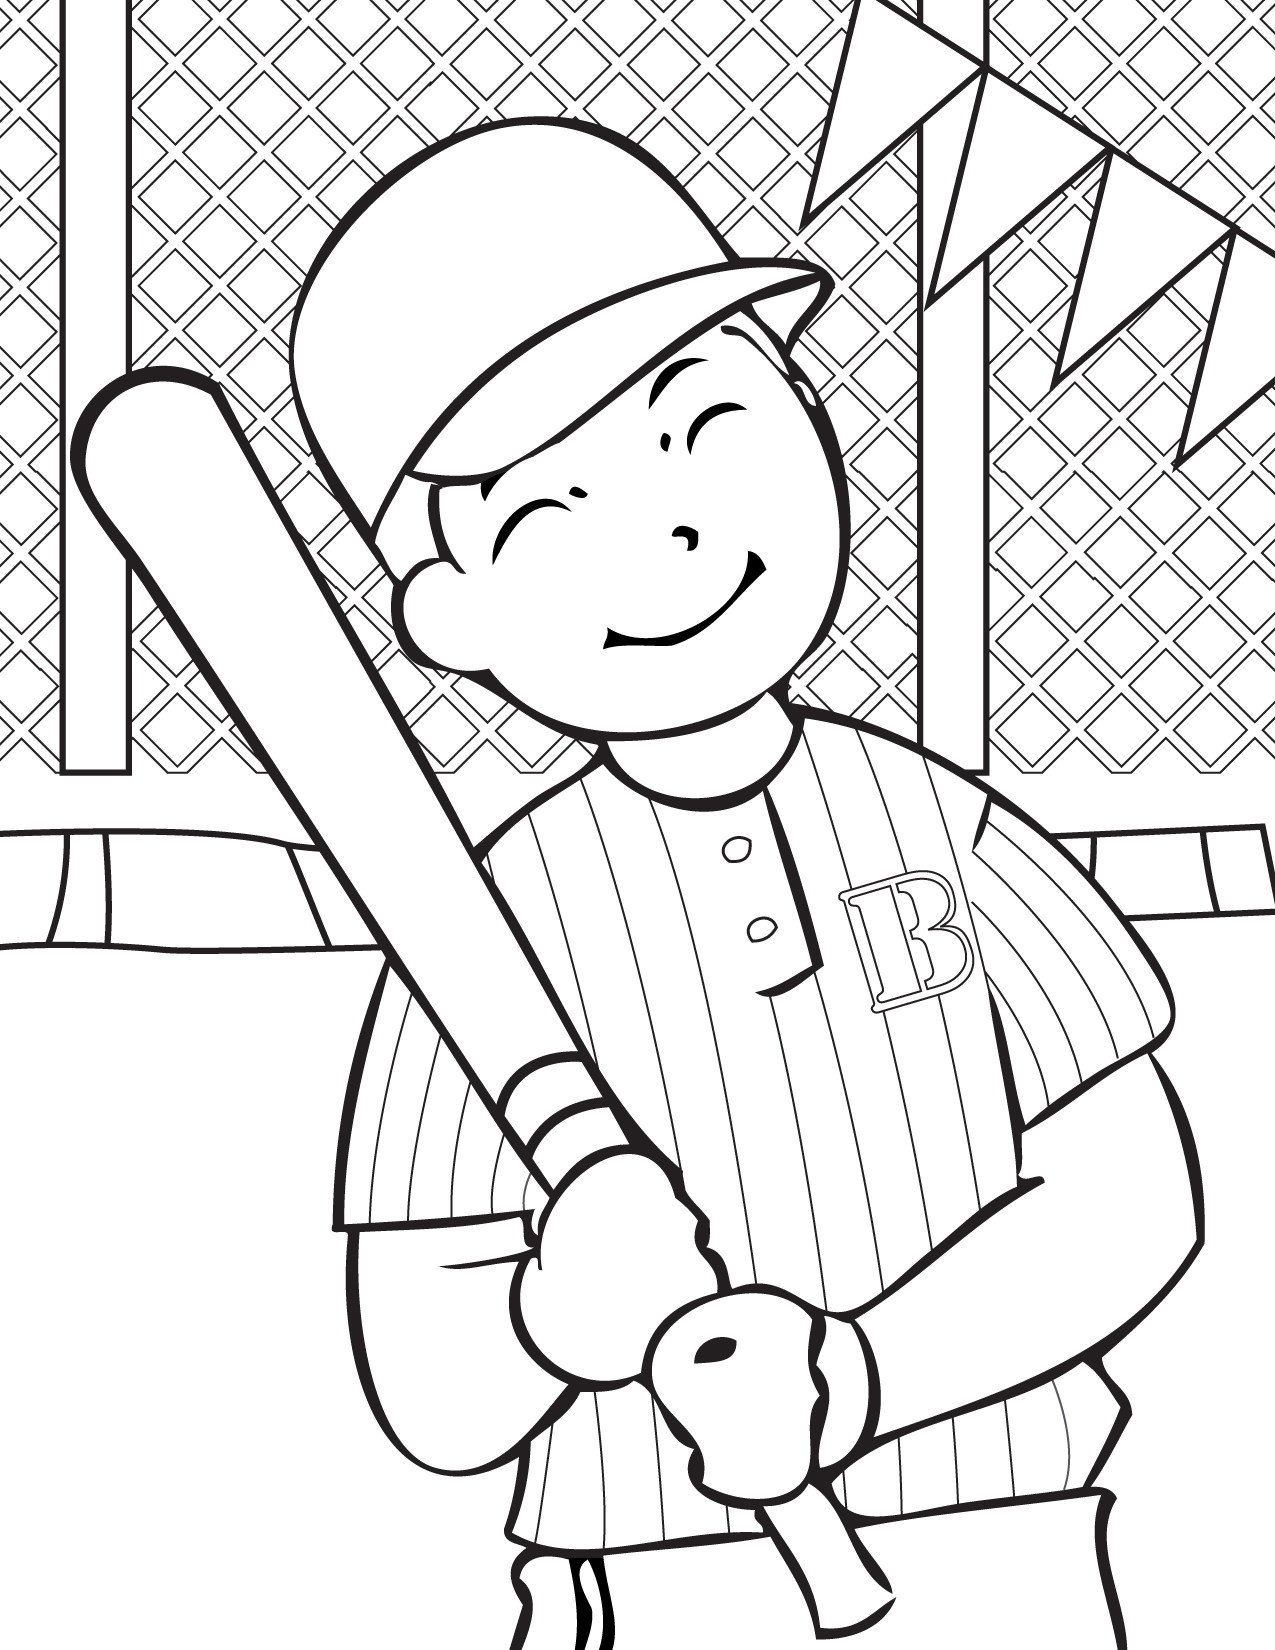 Sports Coloring Pages Printable
 Free Printable Baseball Coloring Pages for Kids Best